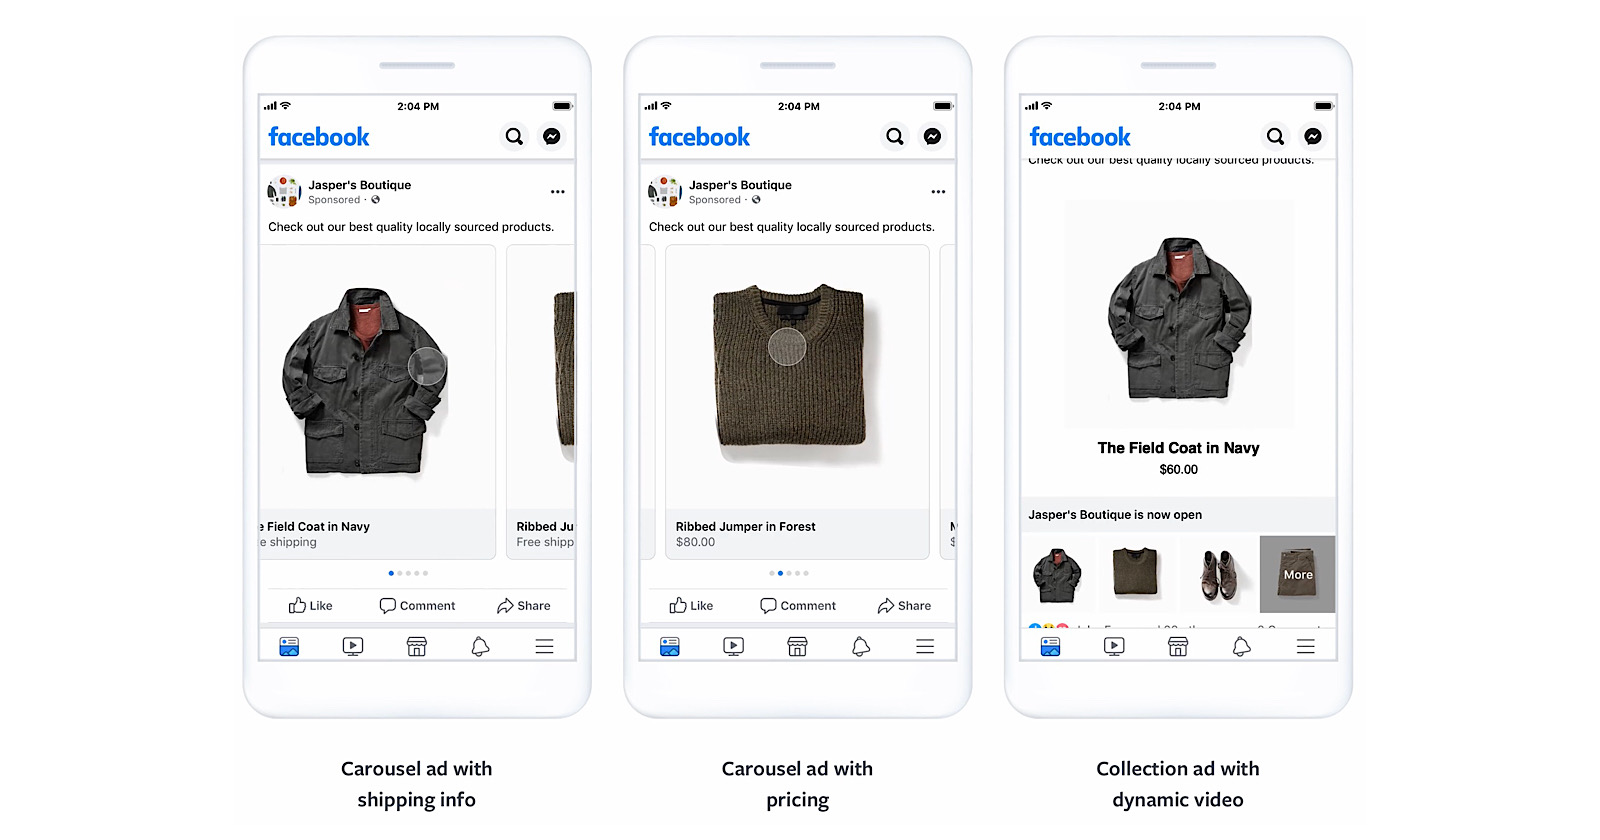 facebook can now deliver ads that are dynamically tailored to each user via mattgsouthern